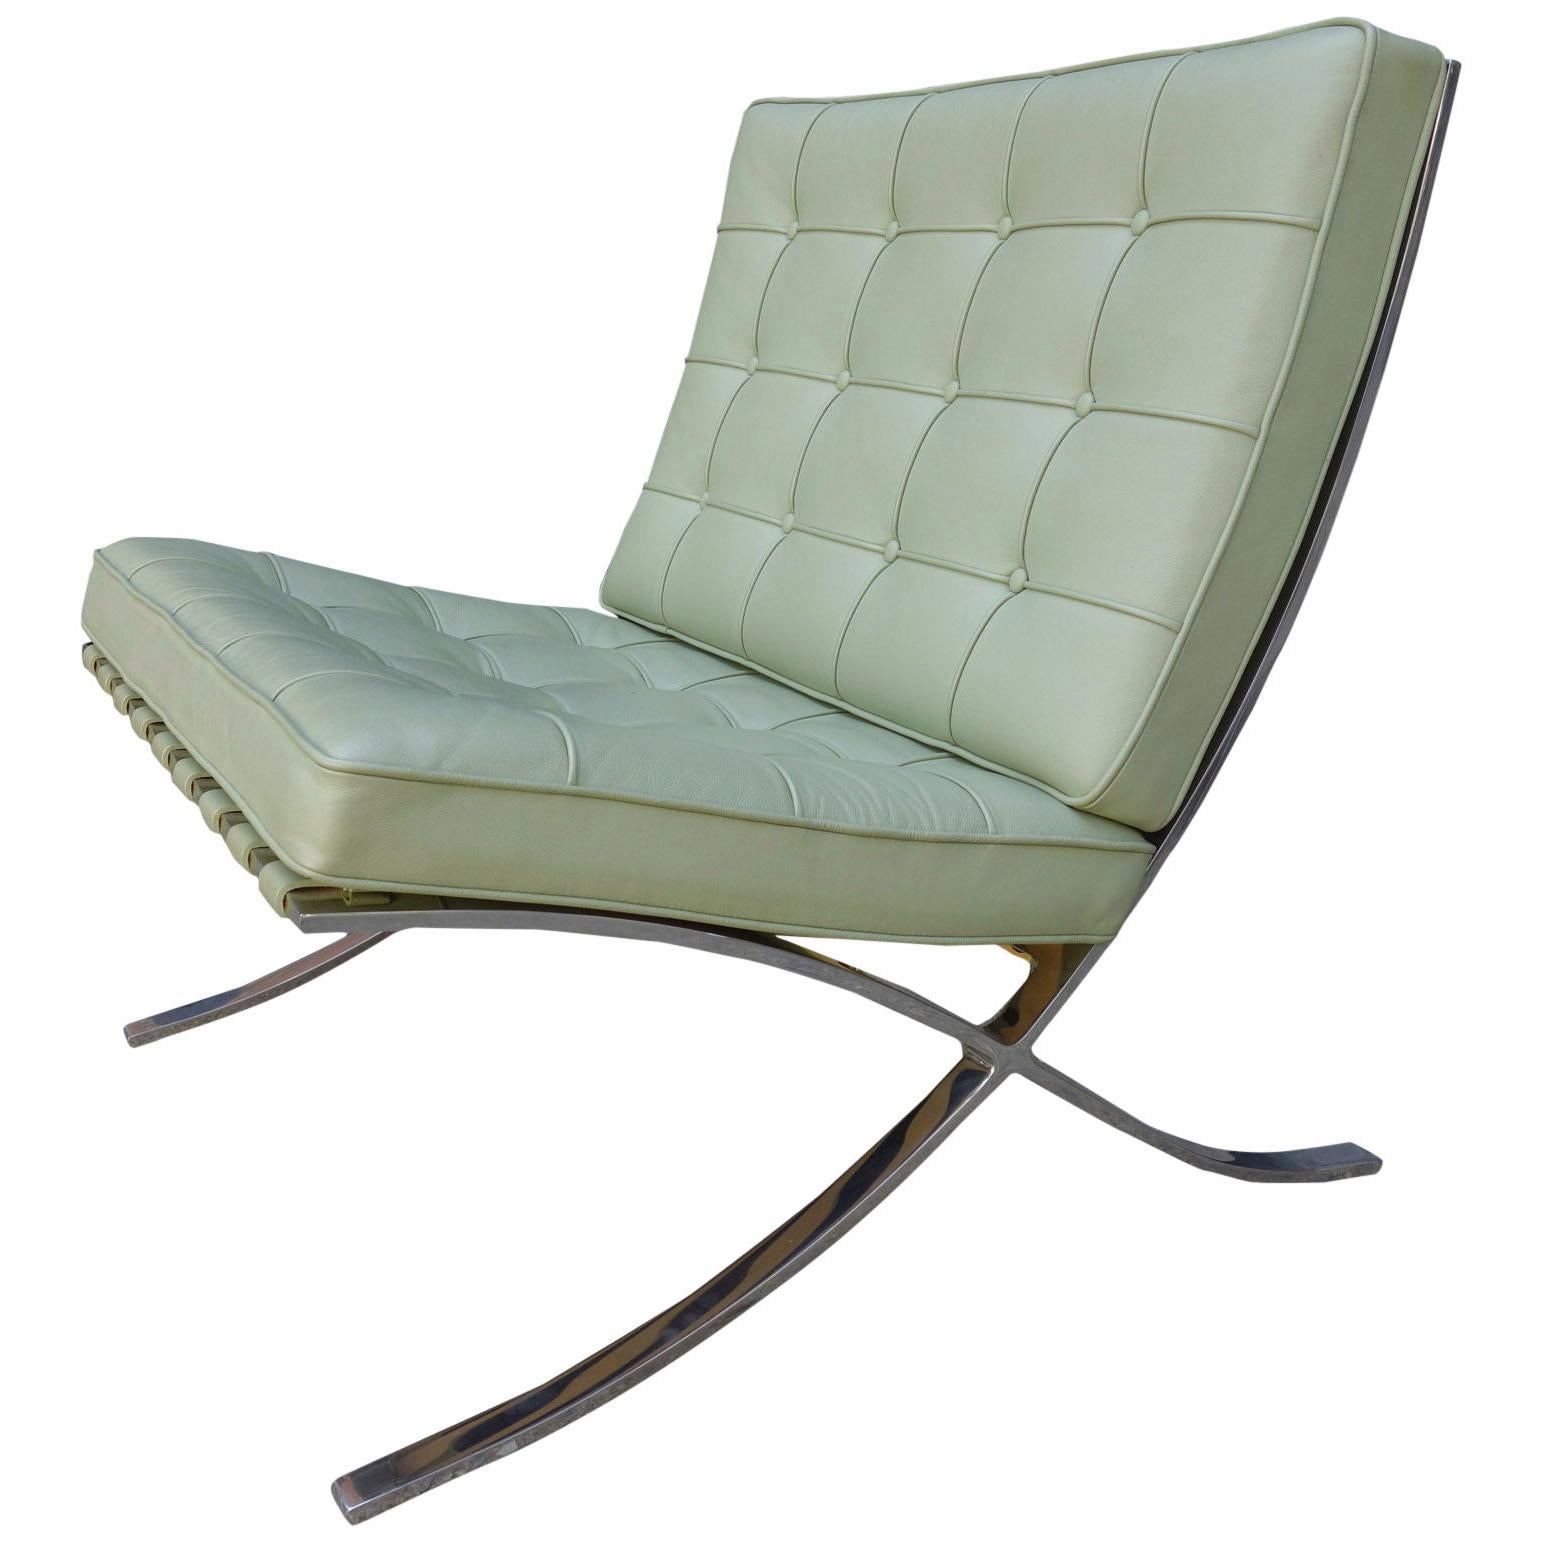 Midcentury Ludwig Mies van der Rohe Barcelona chair for Knoll. The Classic chair that helped define midcentury modernism. This is the highly desirable version produced in non magnetic premium grade 304 bar stock stainless steel hand-buffed to a